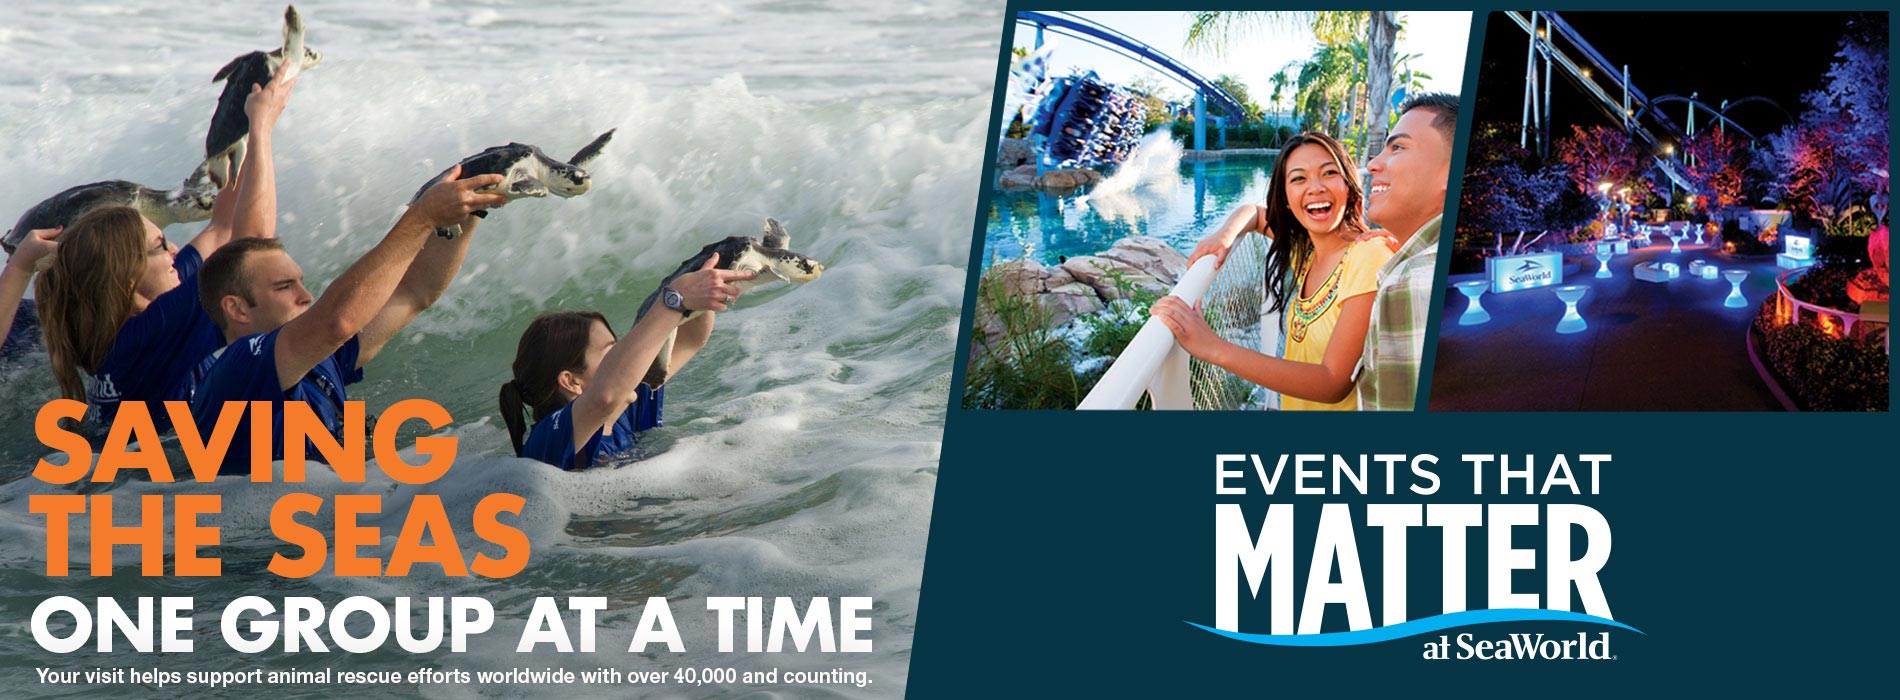 Events That Matter at SeaWorld